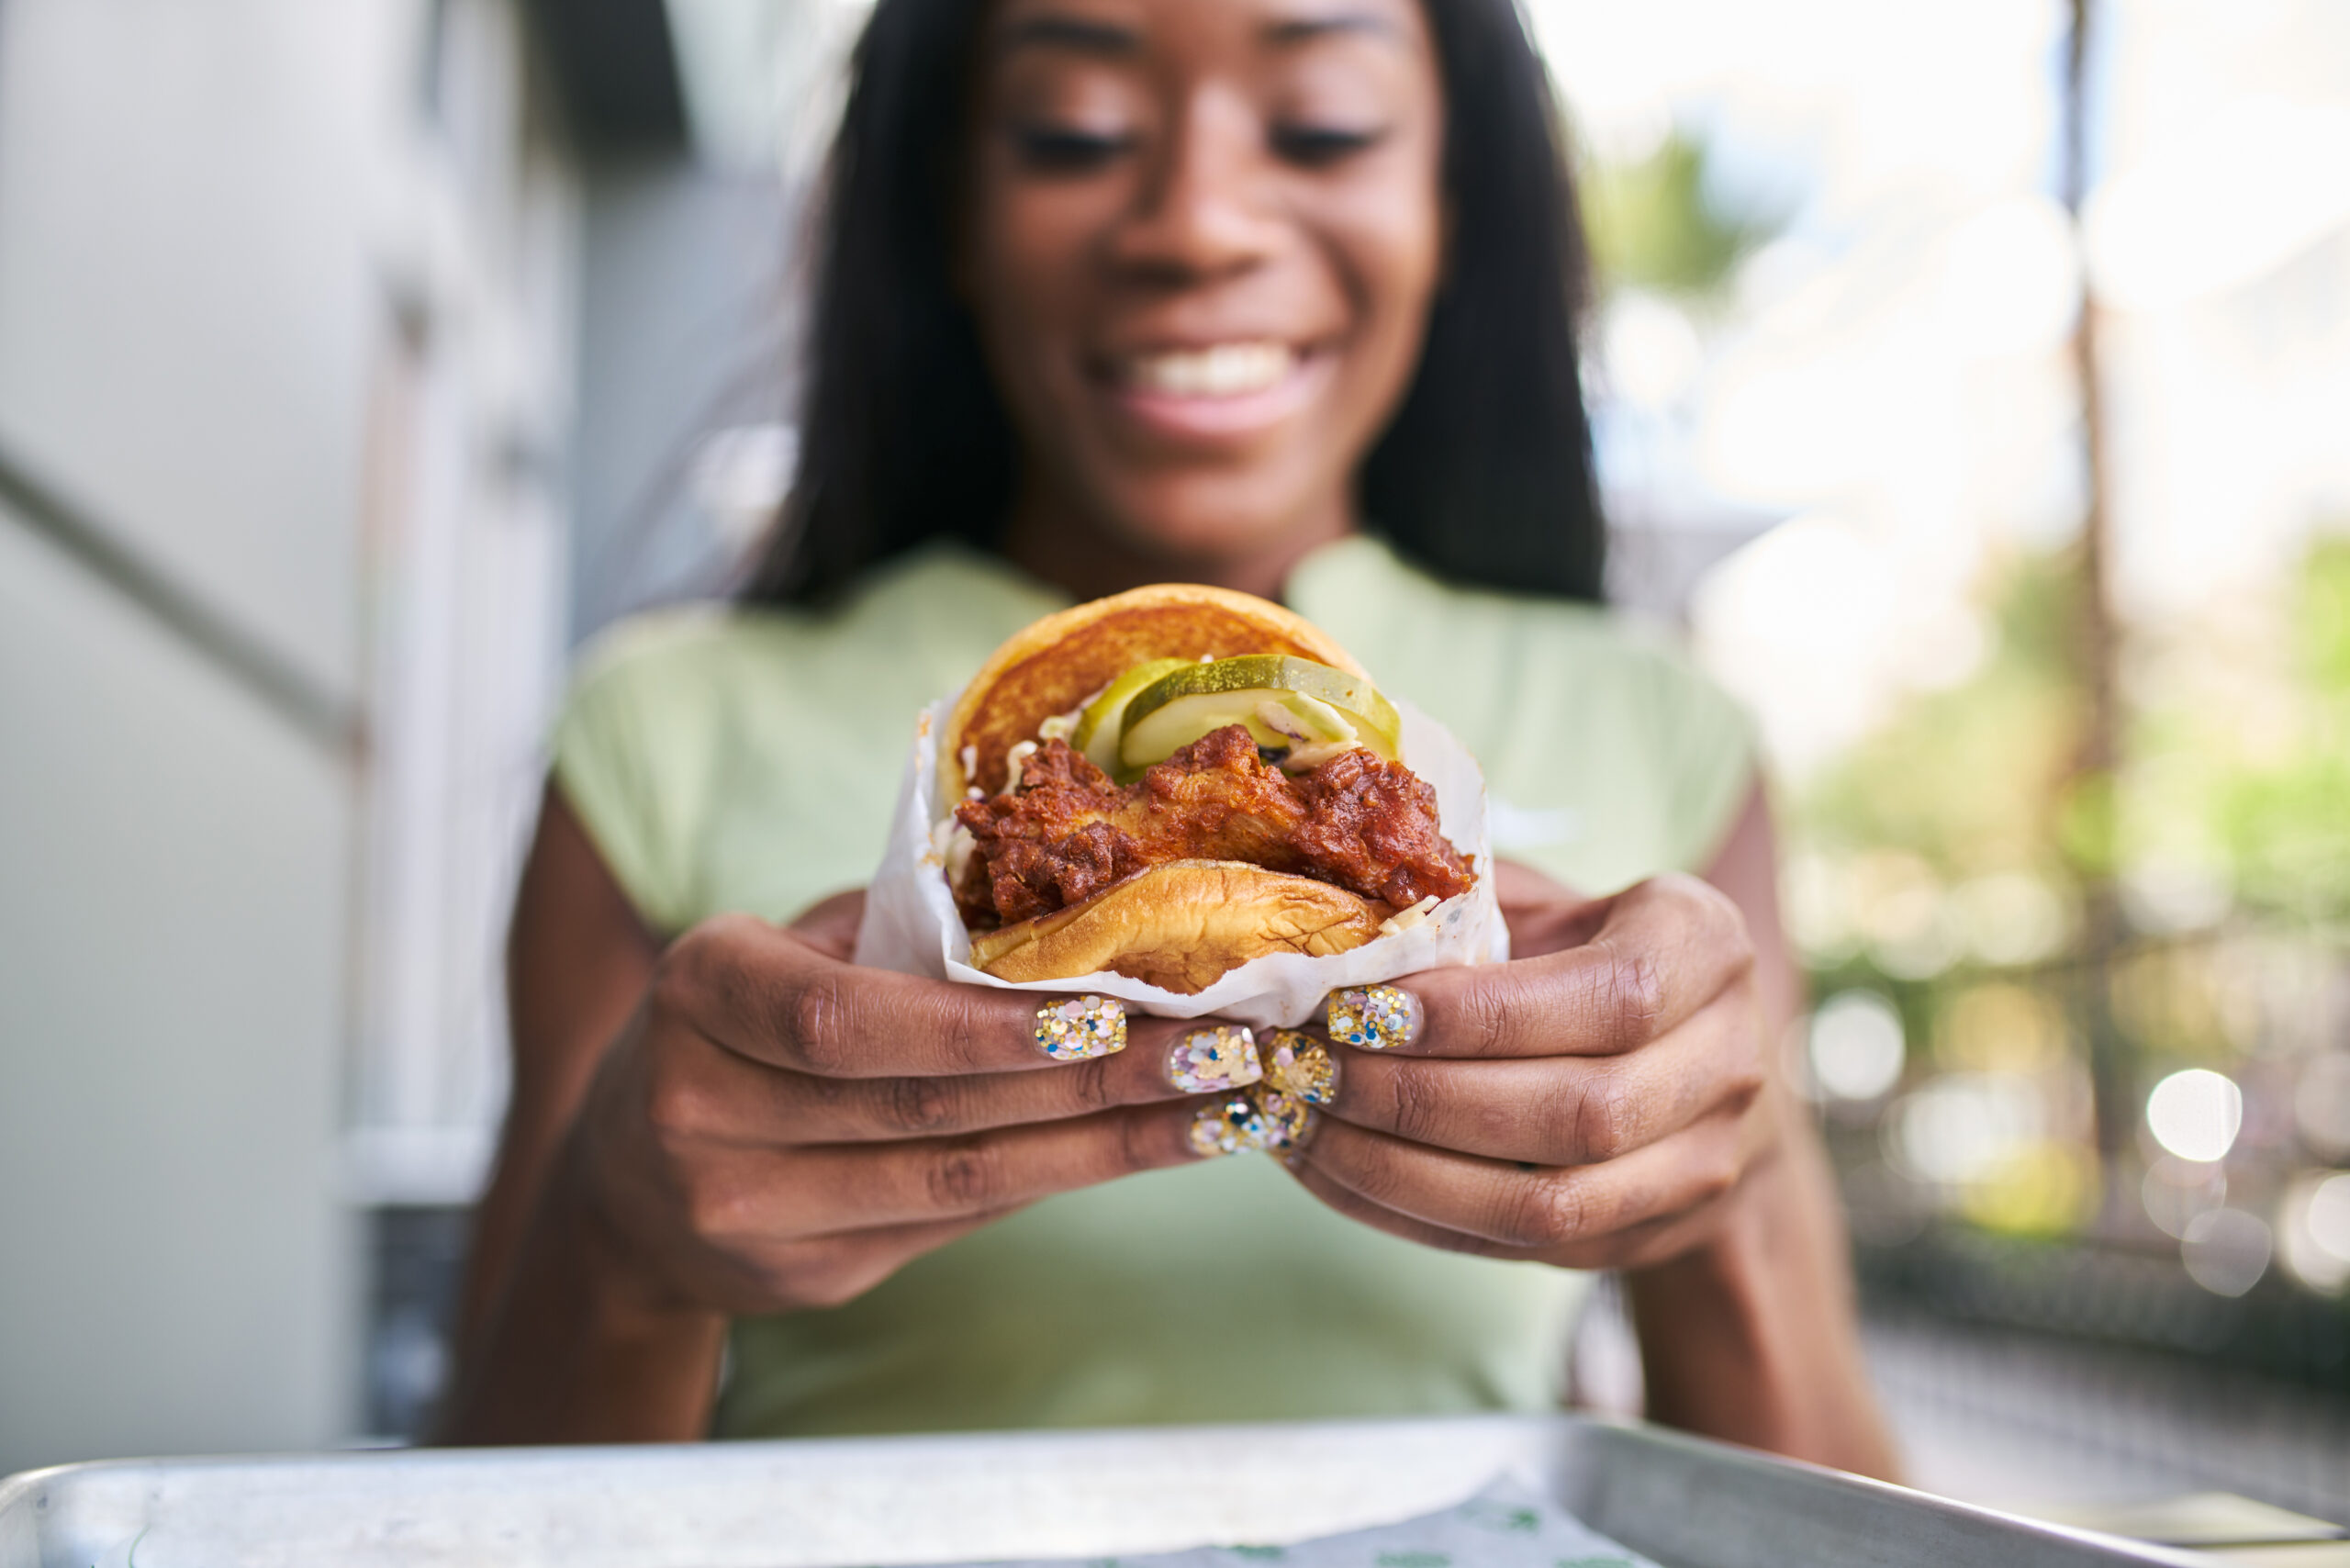 Woman holding a burger and smiling